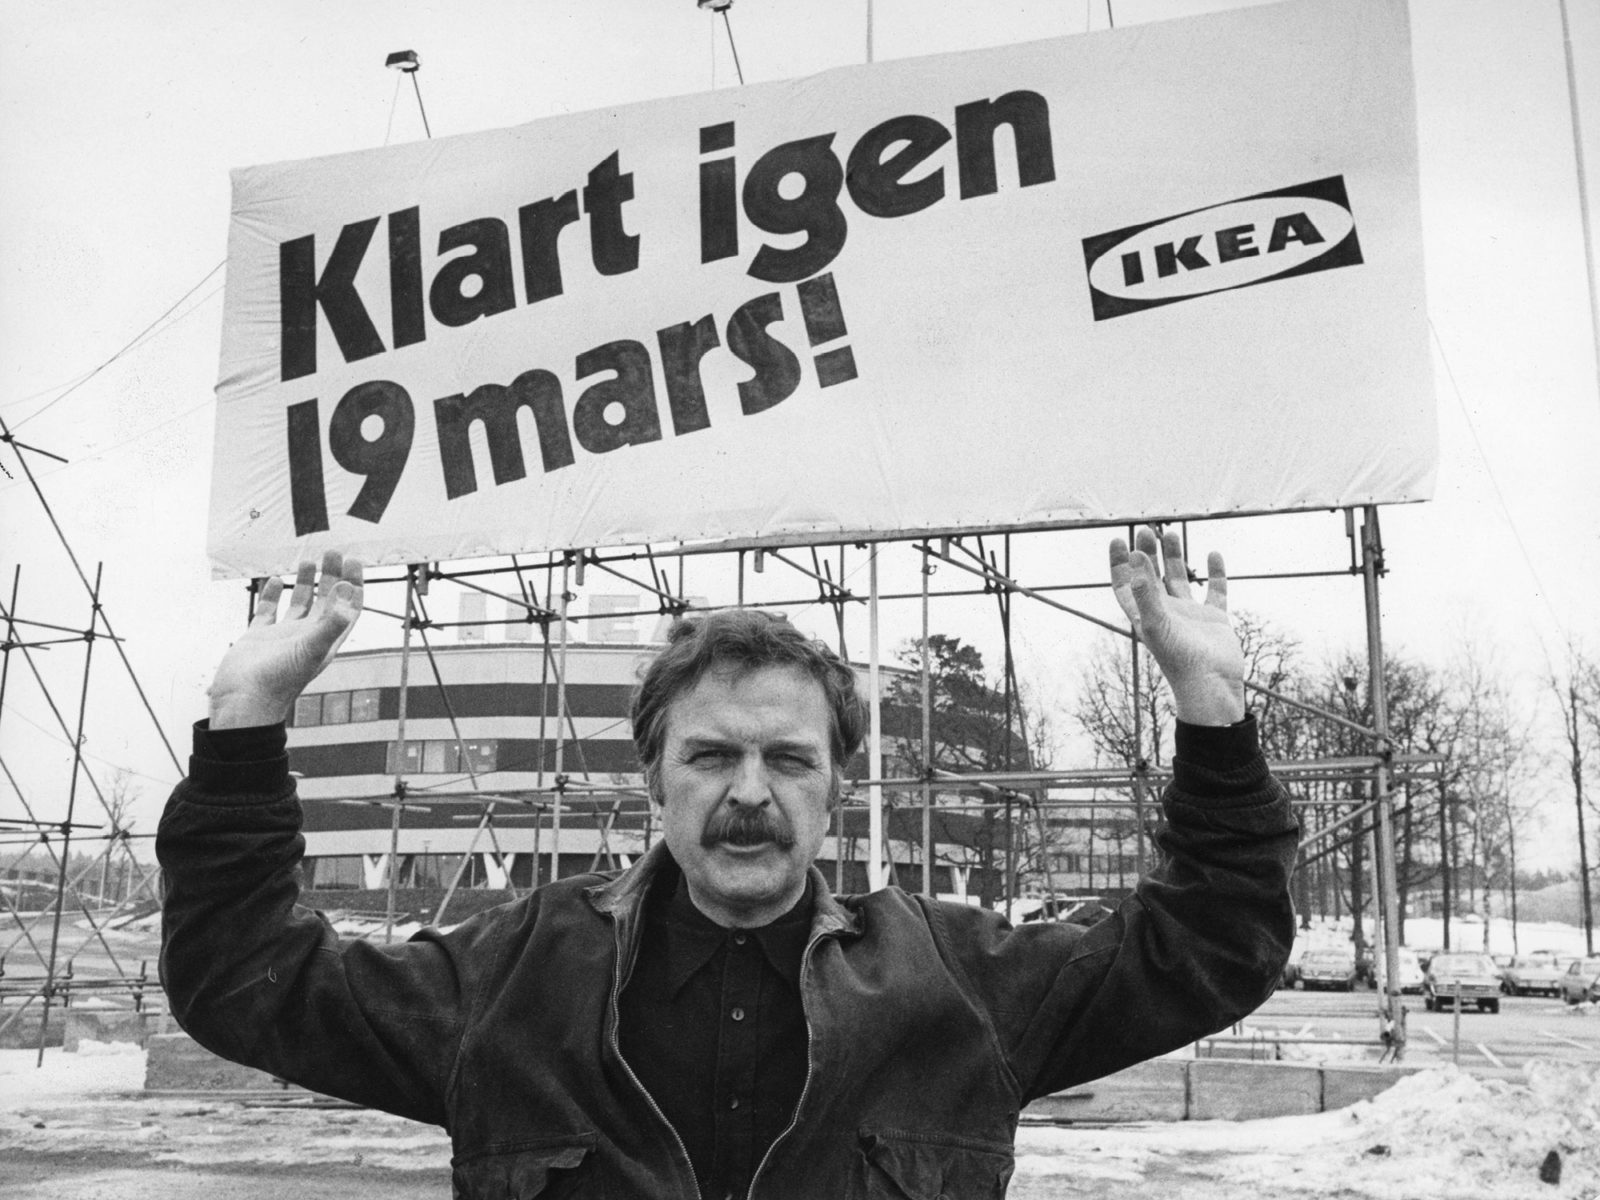 A moustached Hans Ax in suede jacket pretends to hold up huge sign on scaffolding with text: IKEA, Ready again 19 March.